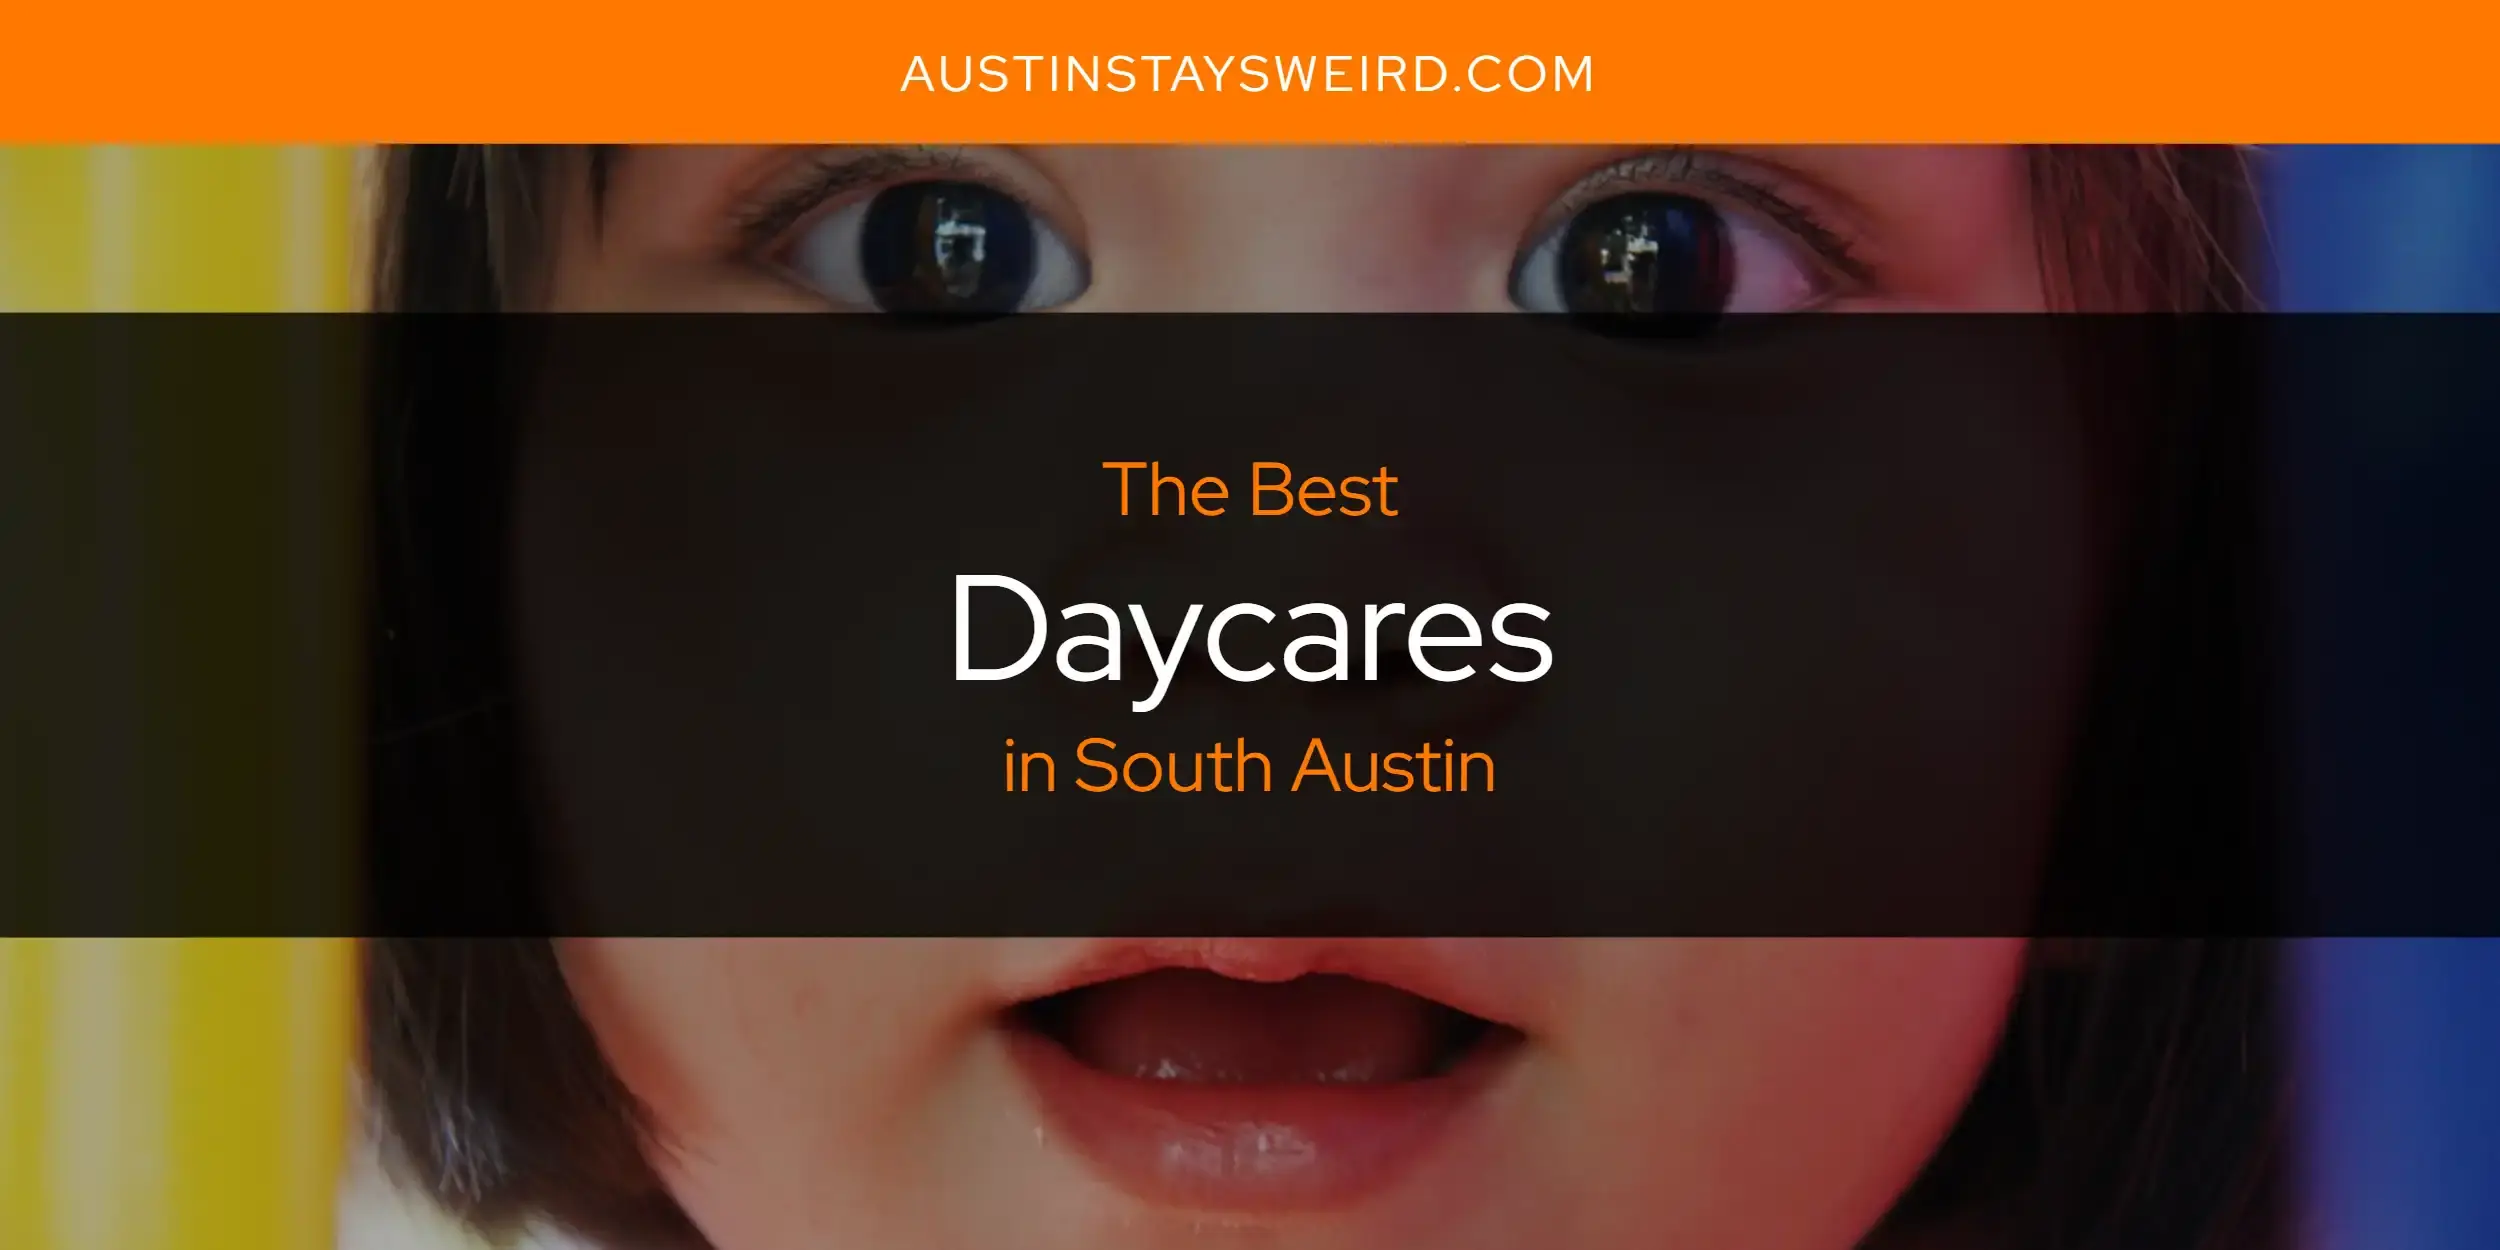 Best Daycares in South Austin? Here's the Top 8